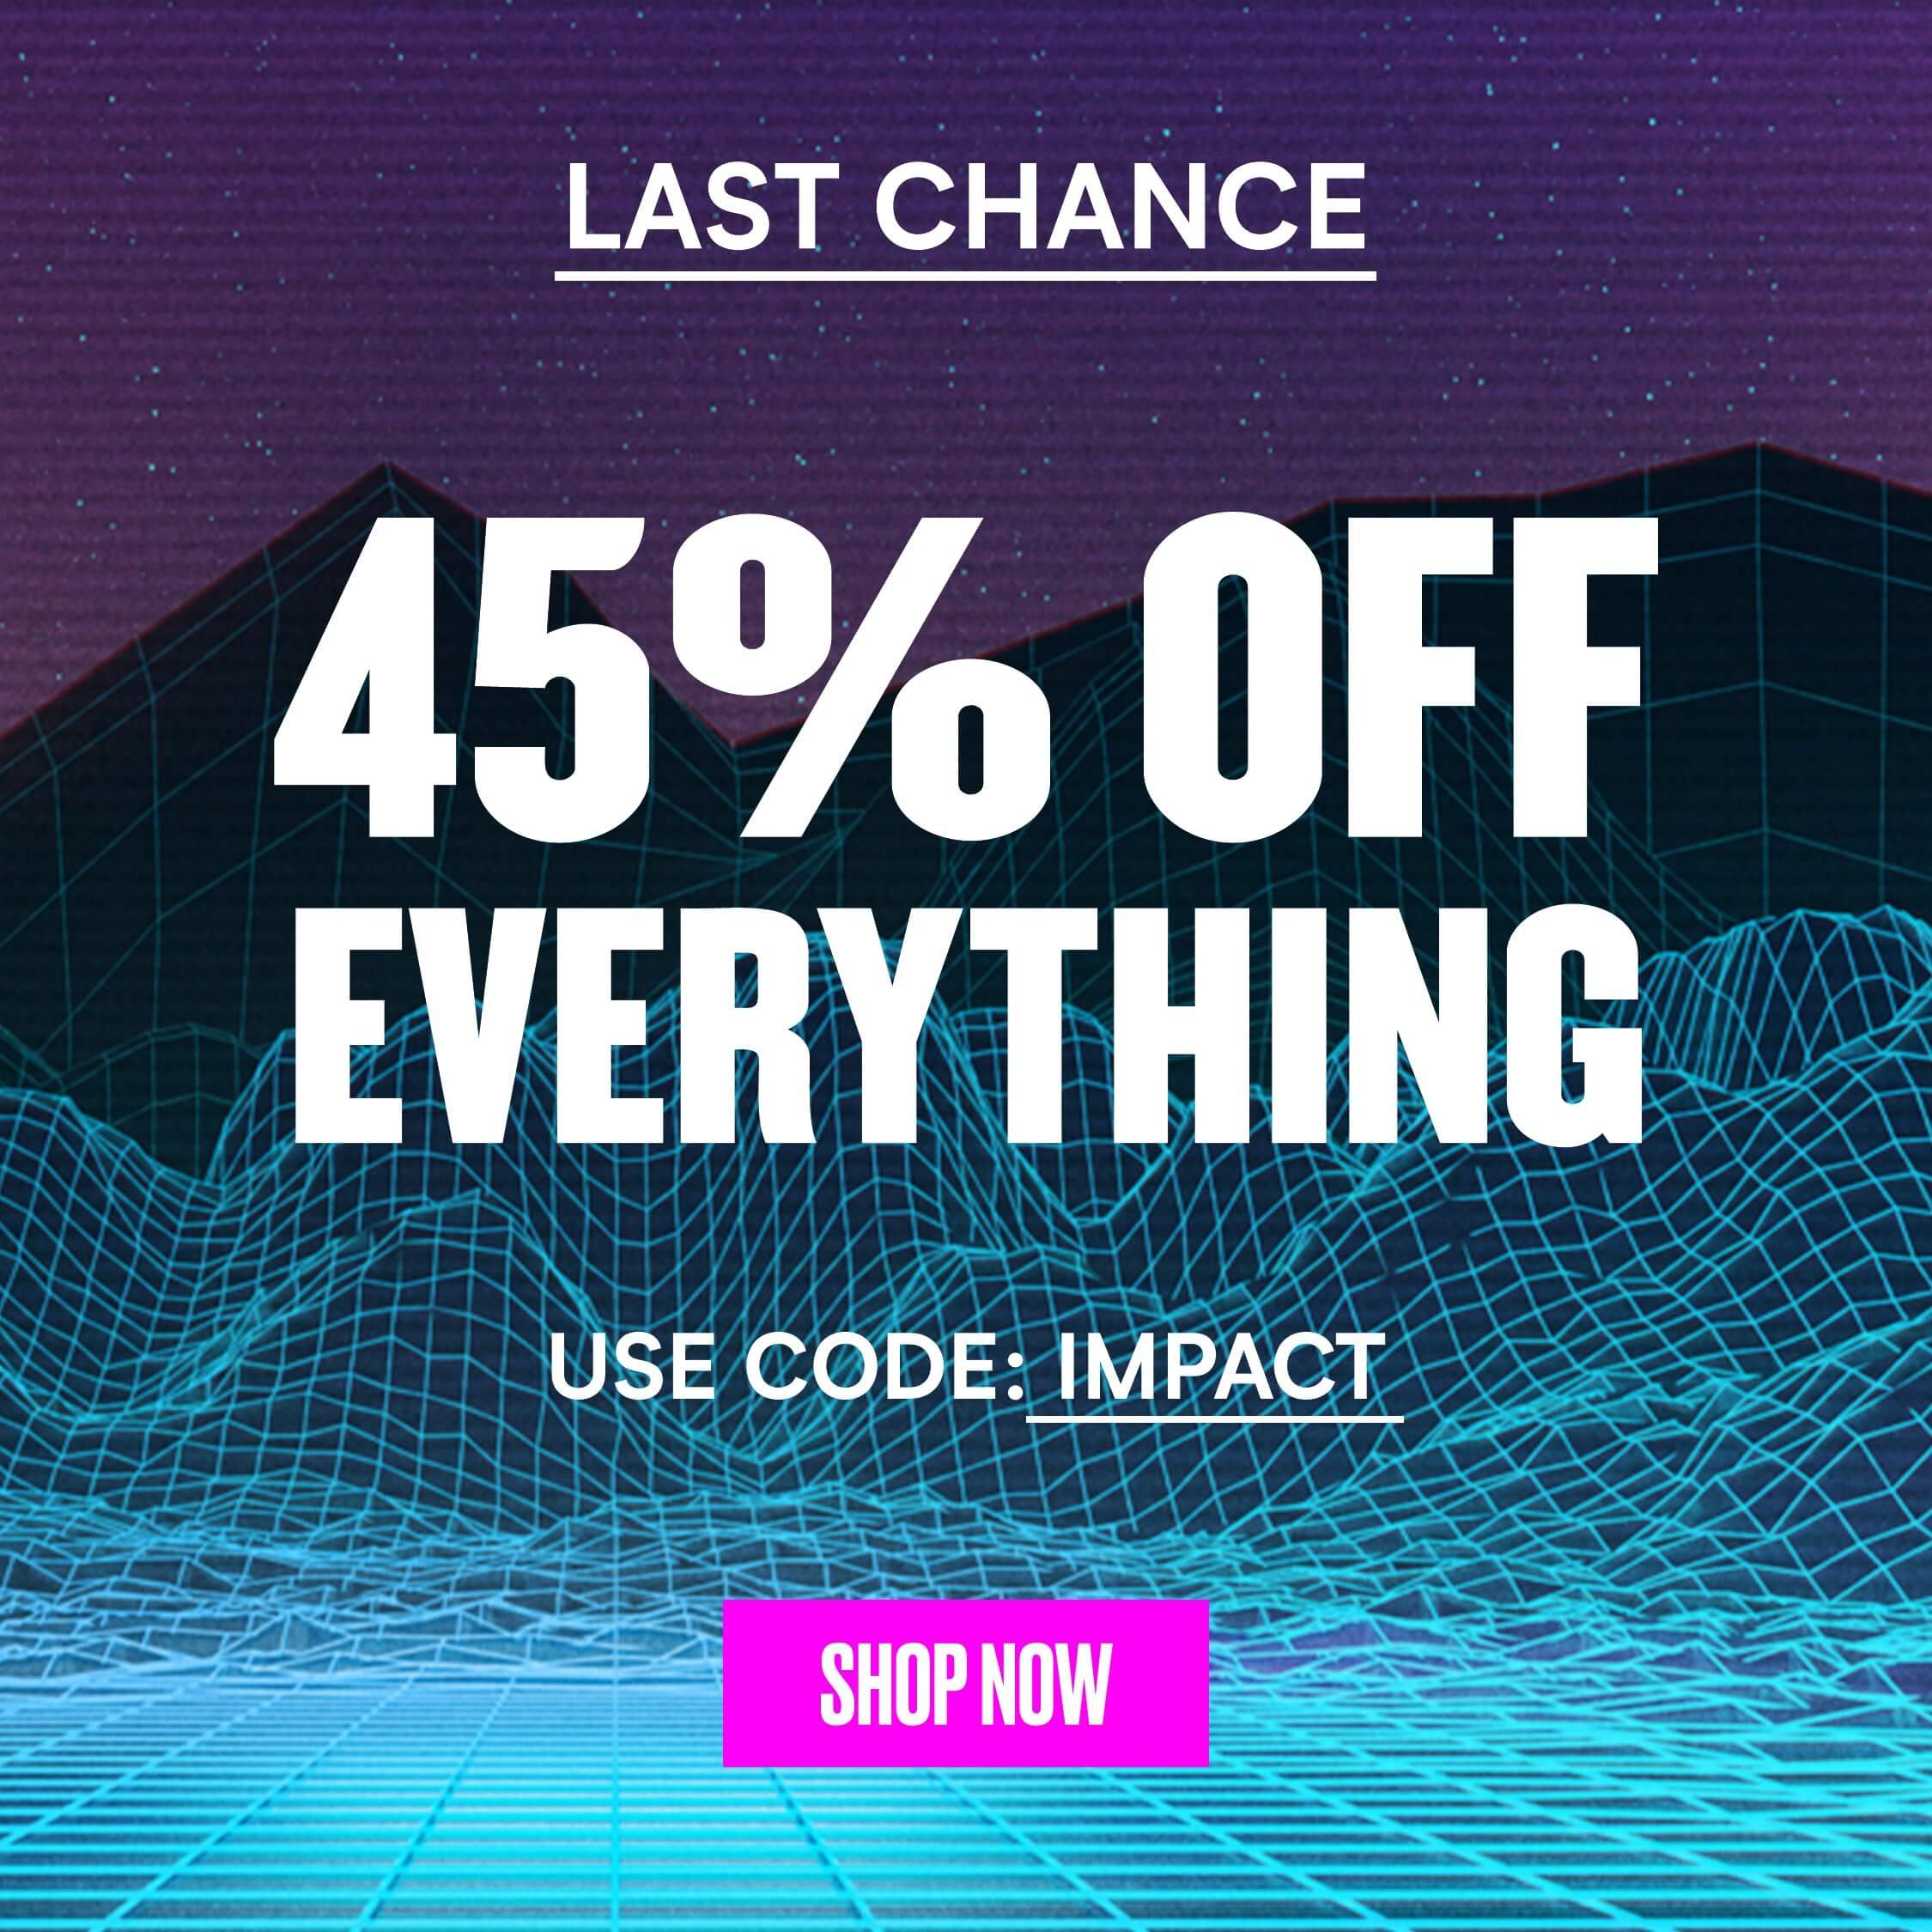 LAST CHANCE 45% OFF EVERYTHING